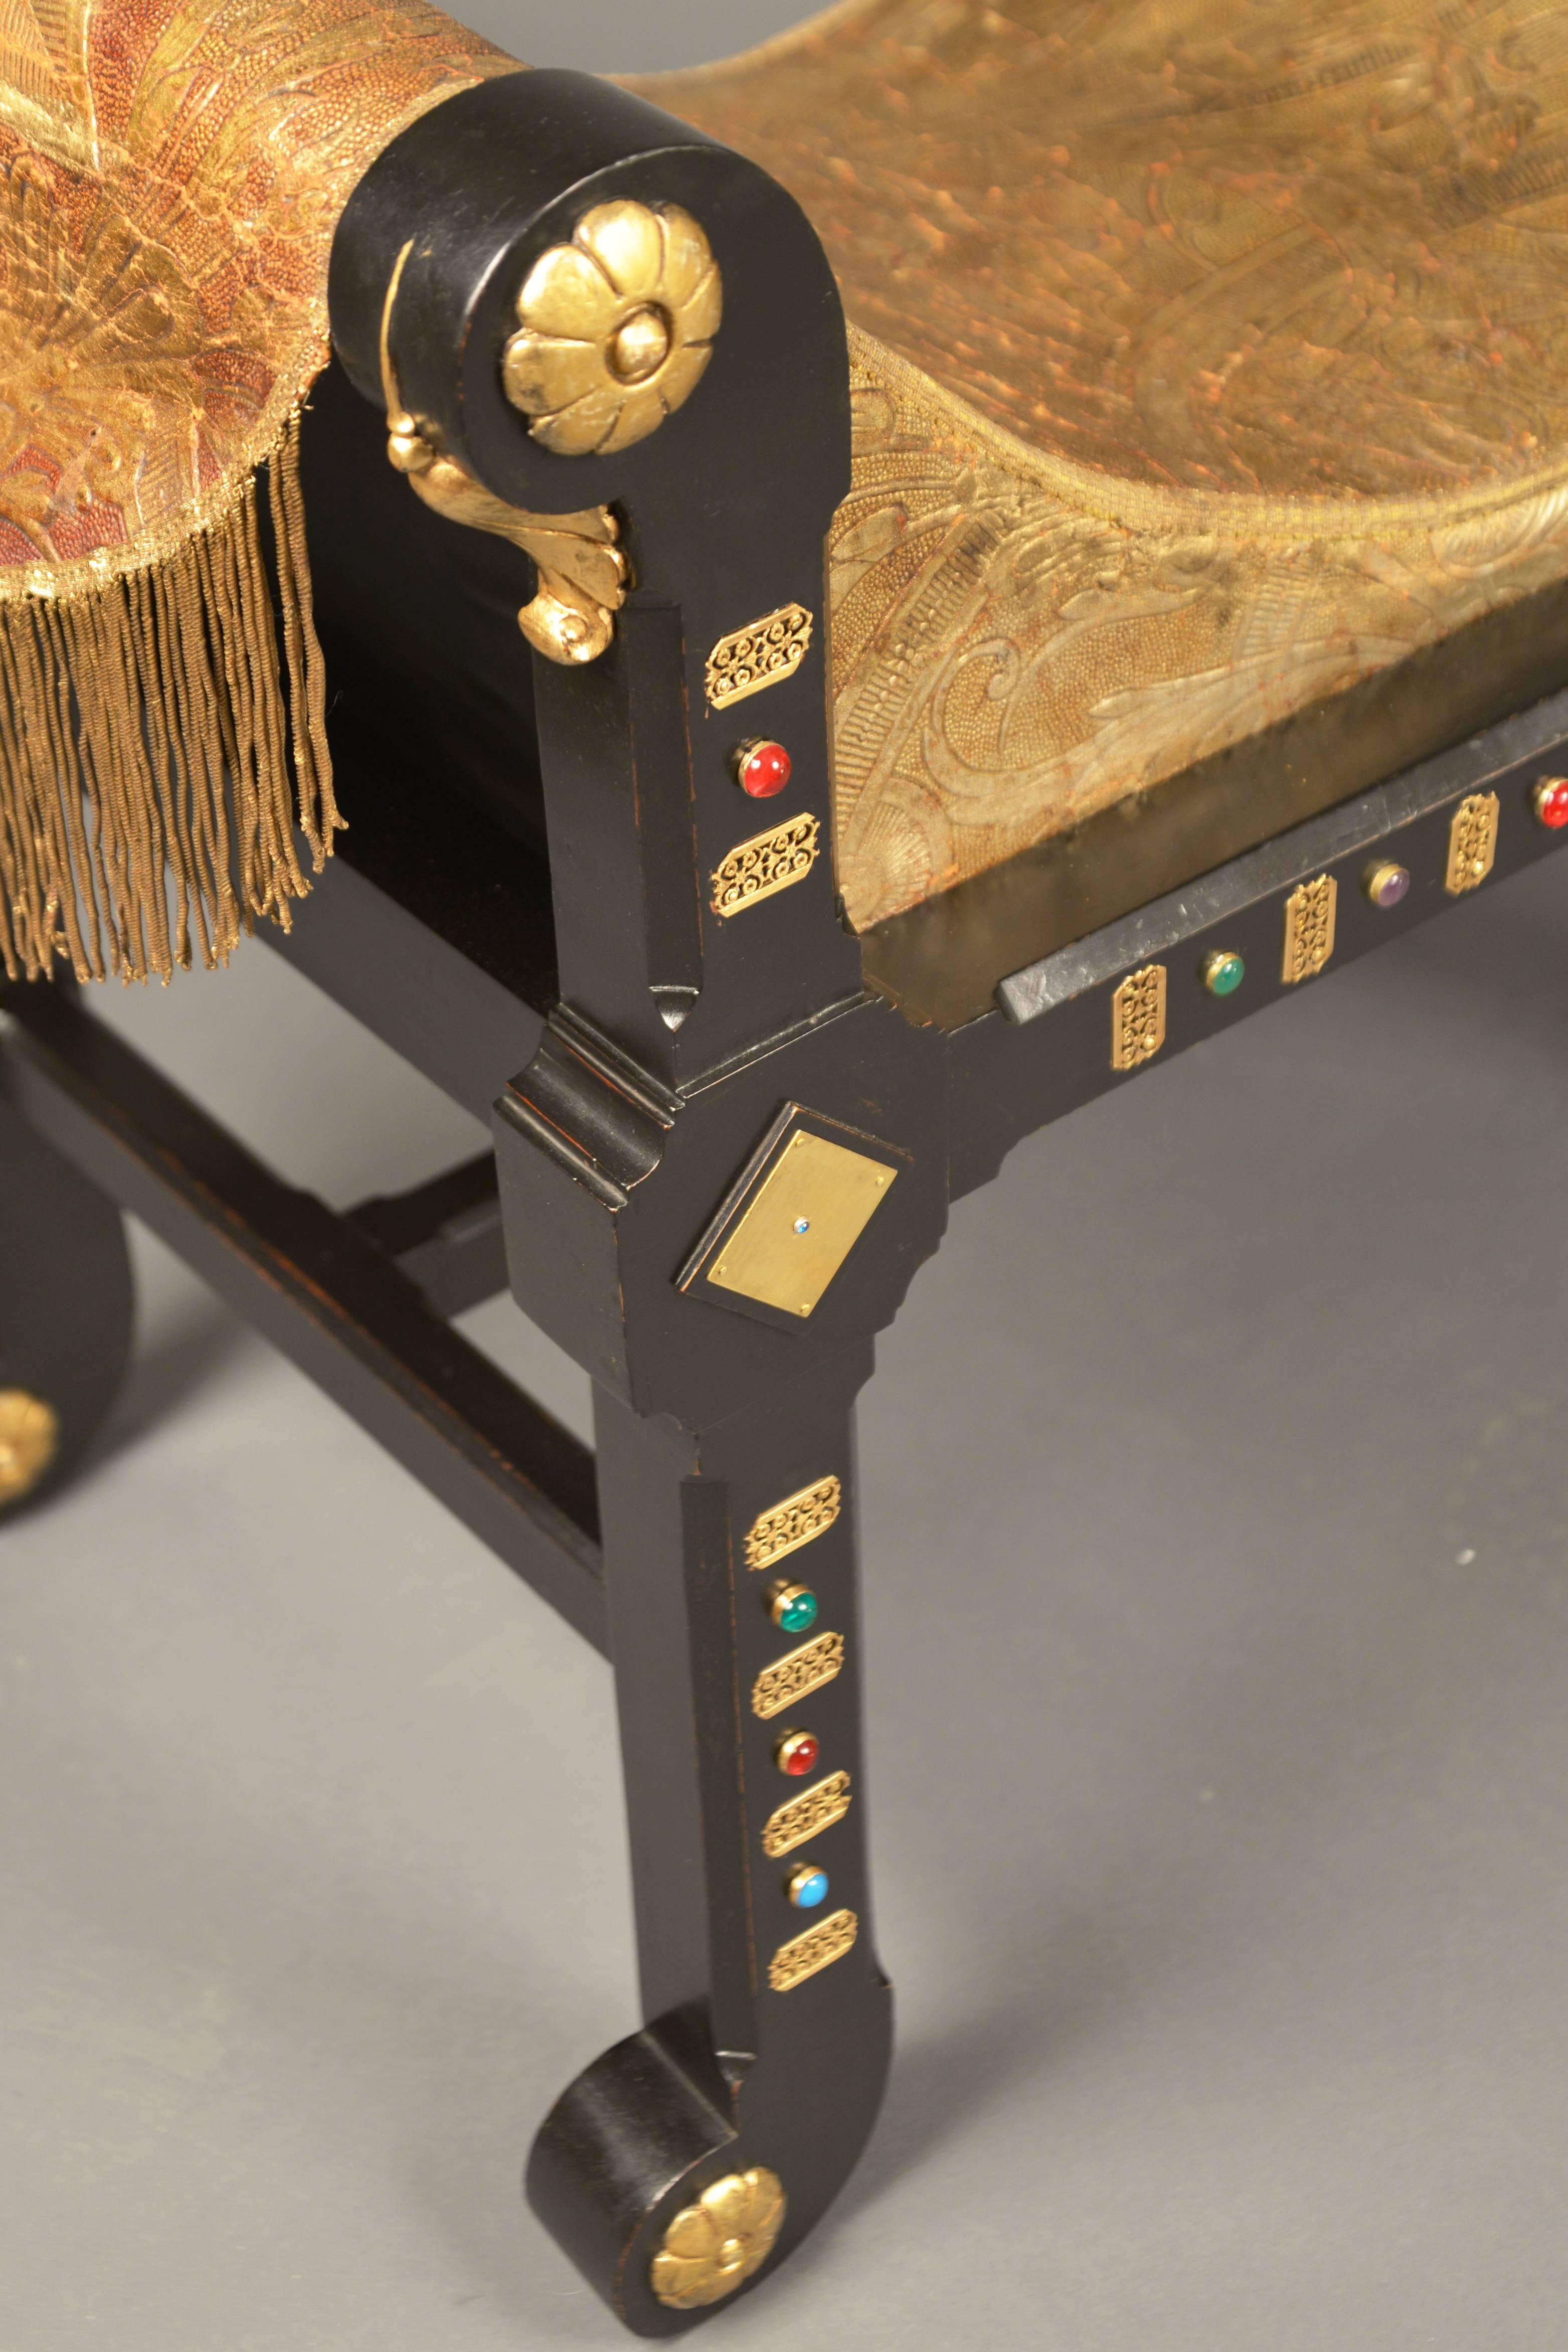 Pair of richly decorated benches in the Egyptian Revival style, made popular after the discovery of King Tut’s tomb in 1922. Ebonized wood with brass decorations and cabuchons throughout, the upholstered seats are covered in painted and embossed